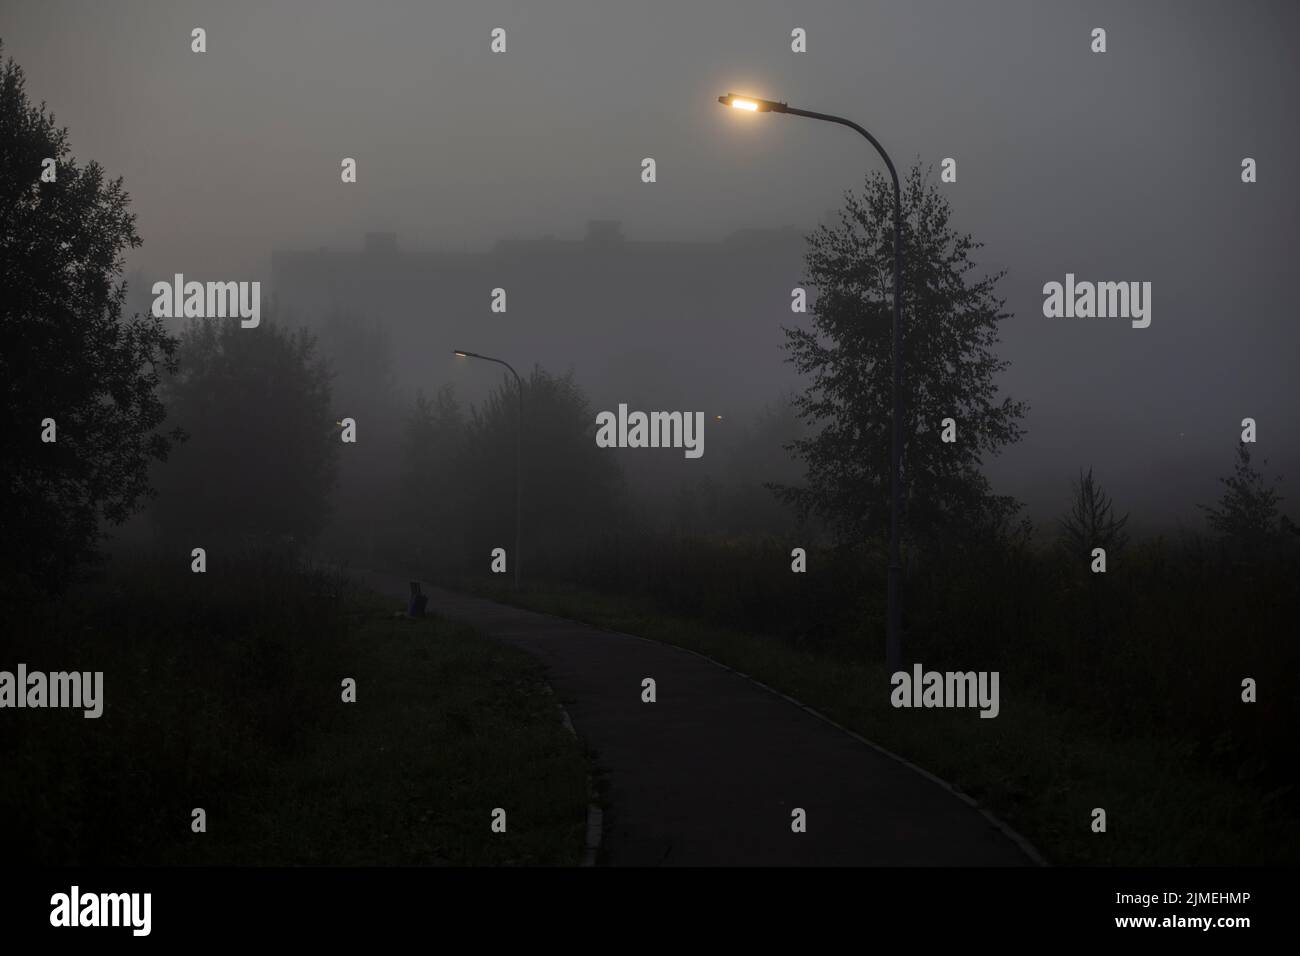 A lighting pole in the fog. Light source in the early morning. Wet weather in the park. Stock Photo